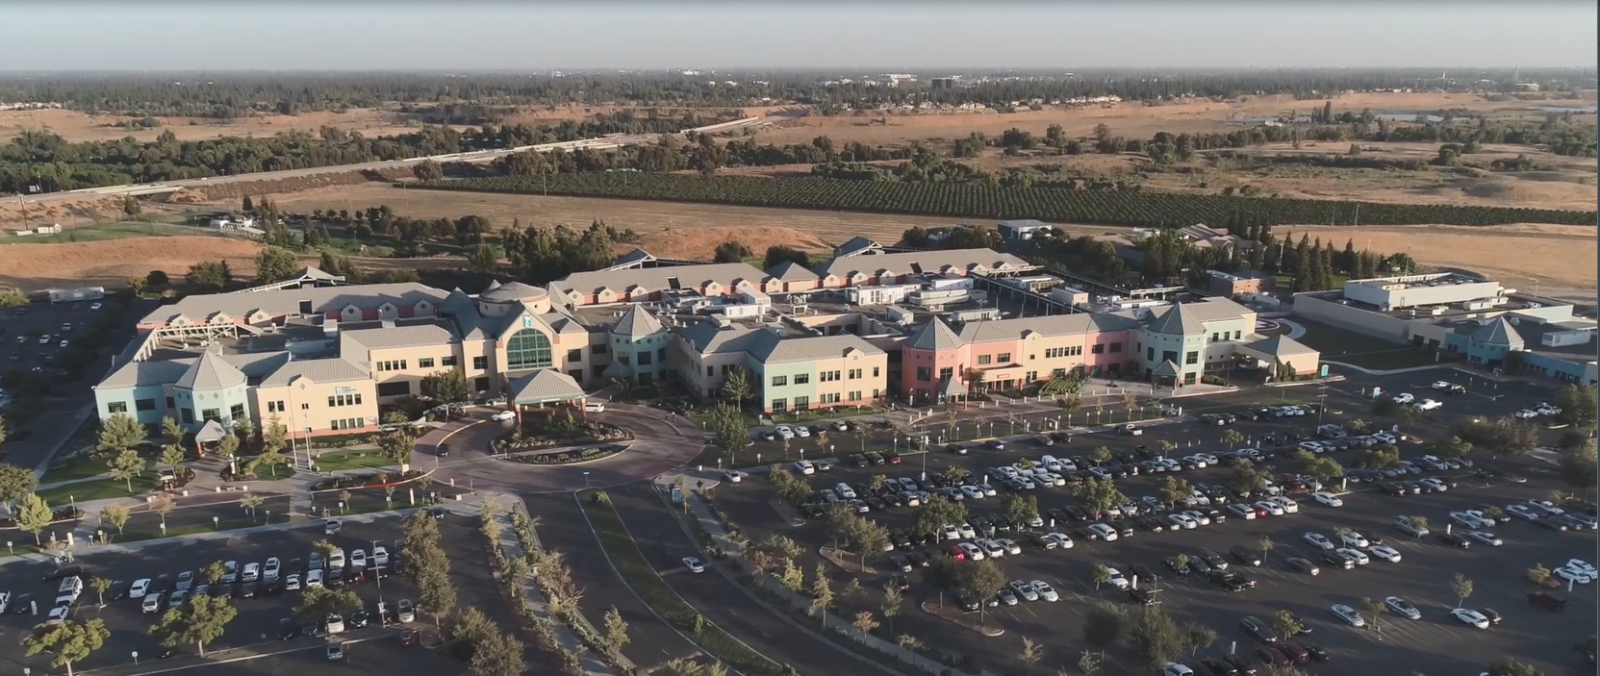 Aerial photo of Valley Children's Hospital main campus in Madera